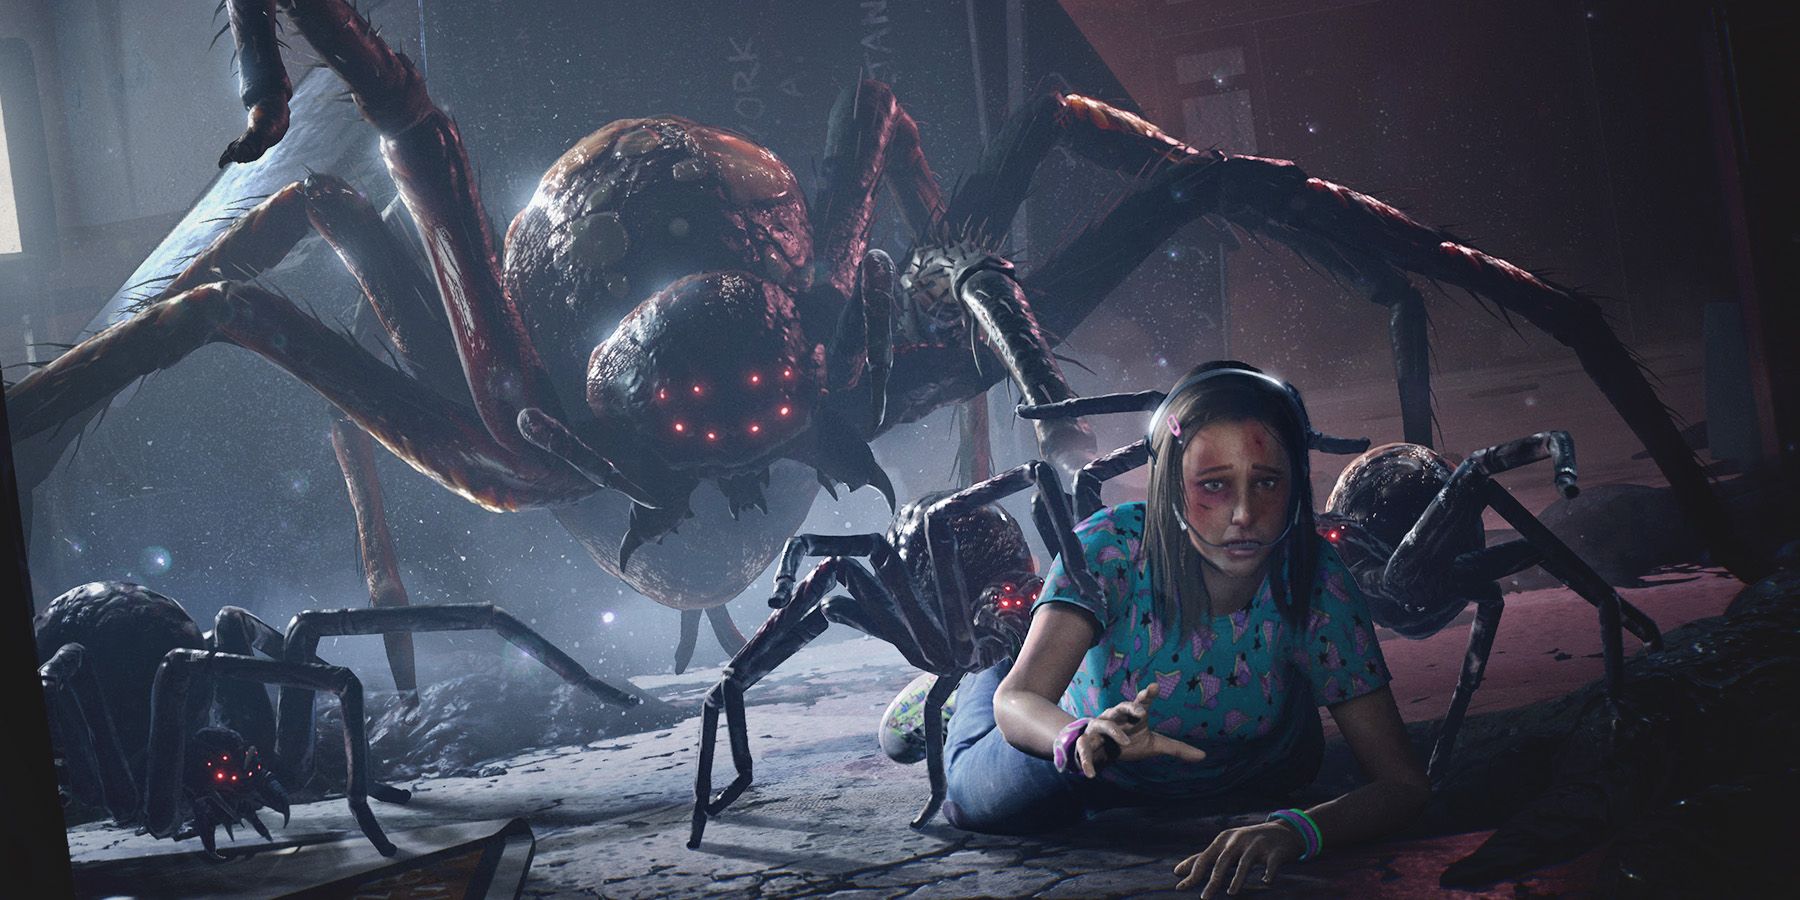 Forest Hills The Last Year spider attack concept artwork